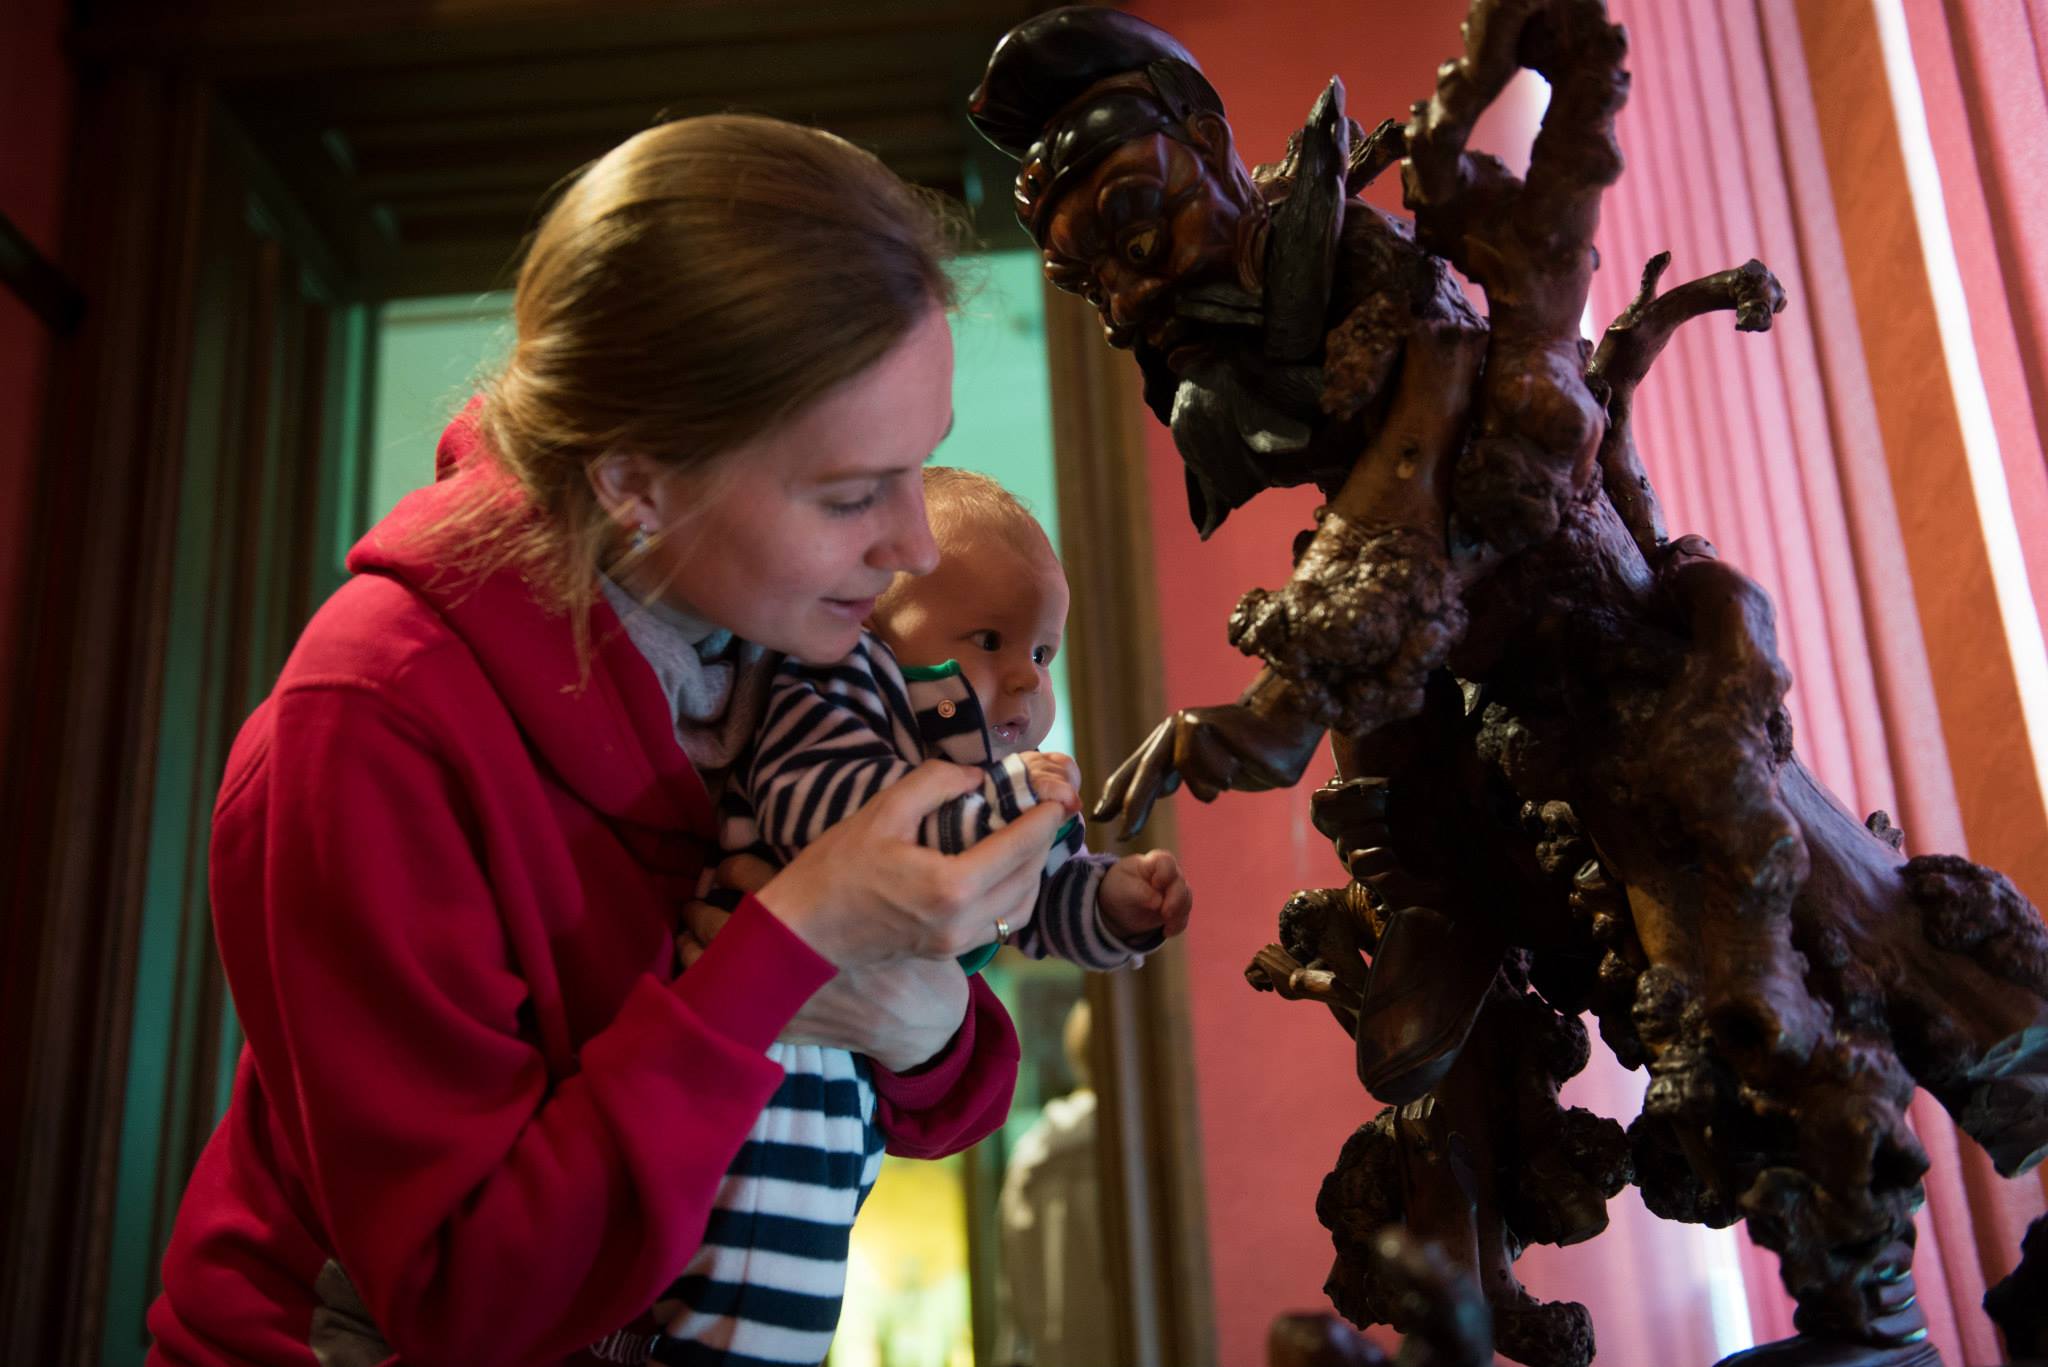 Photo. A woman is holding an infant in front of the wooden sculpture in the Chinese Art Hall.